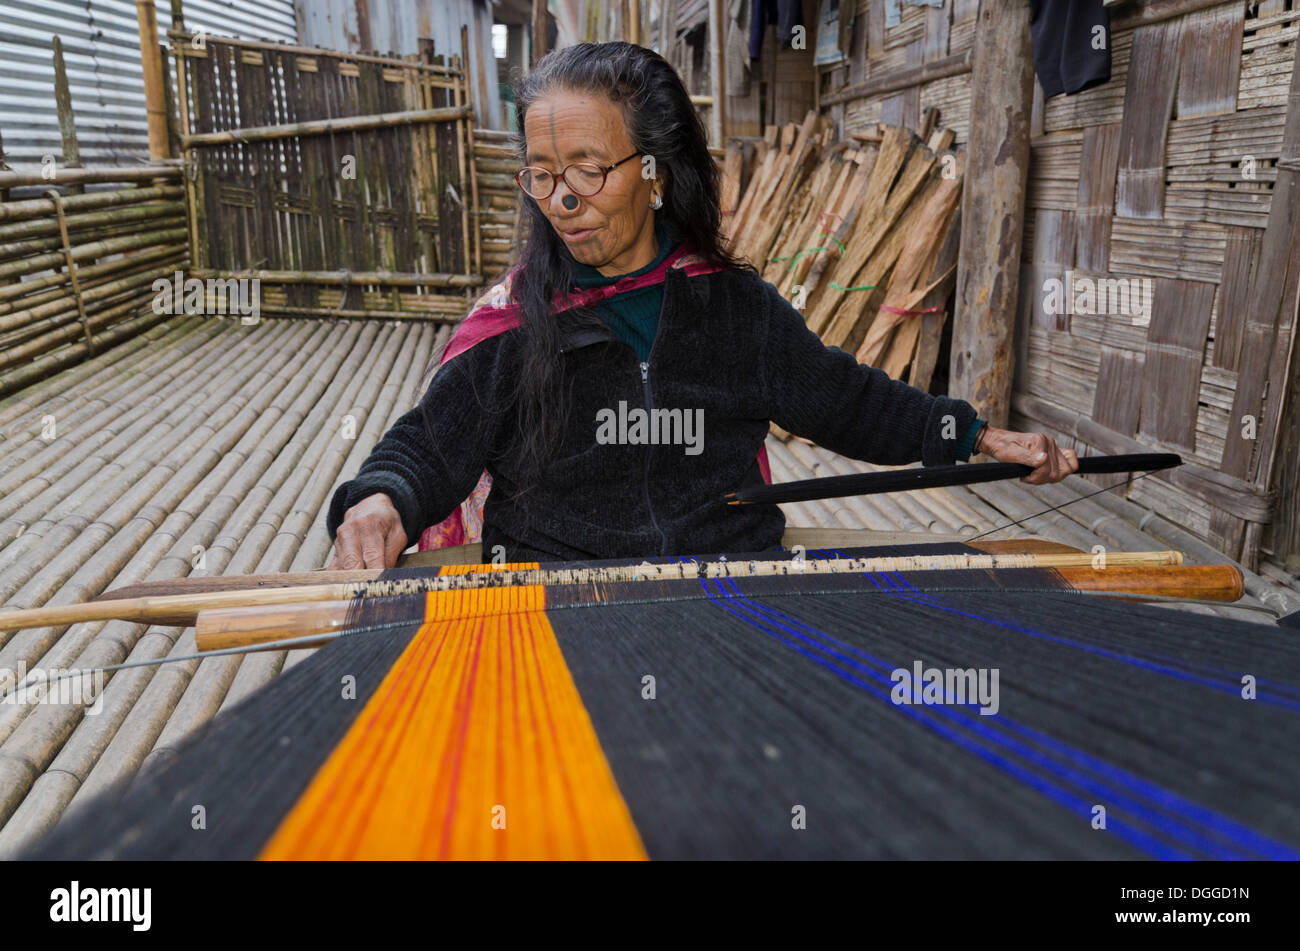 Apatani woman weaving material on a traditional hand loom, Hani, India, Asia Stock Photo